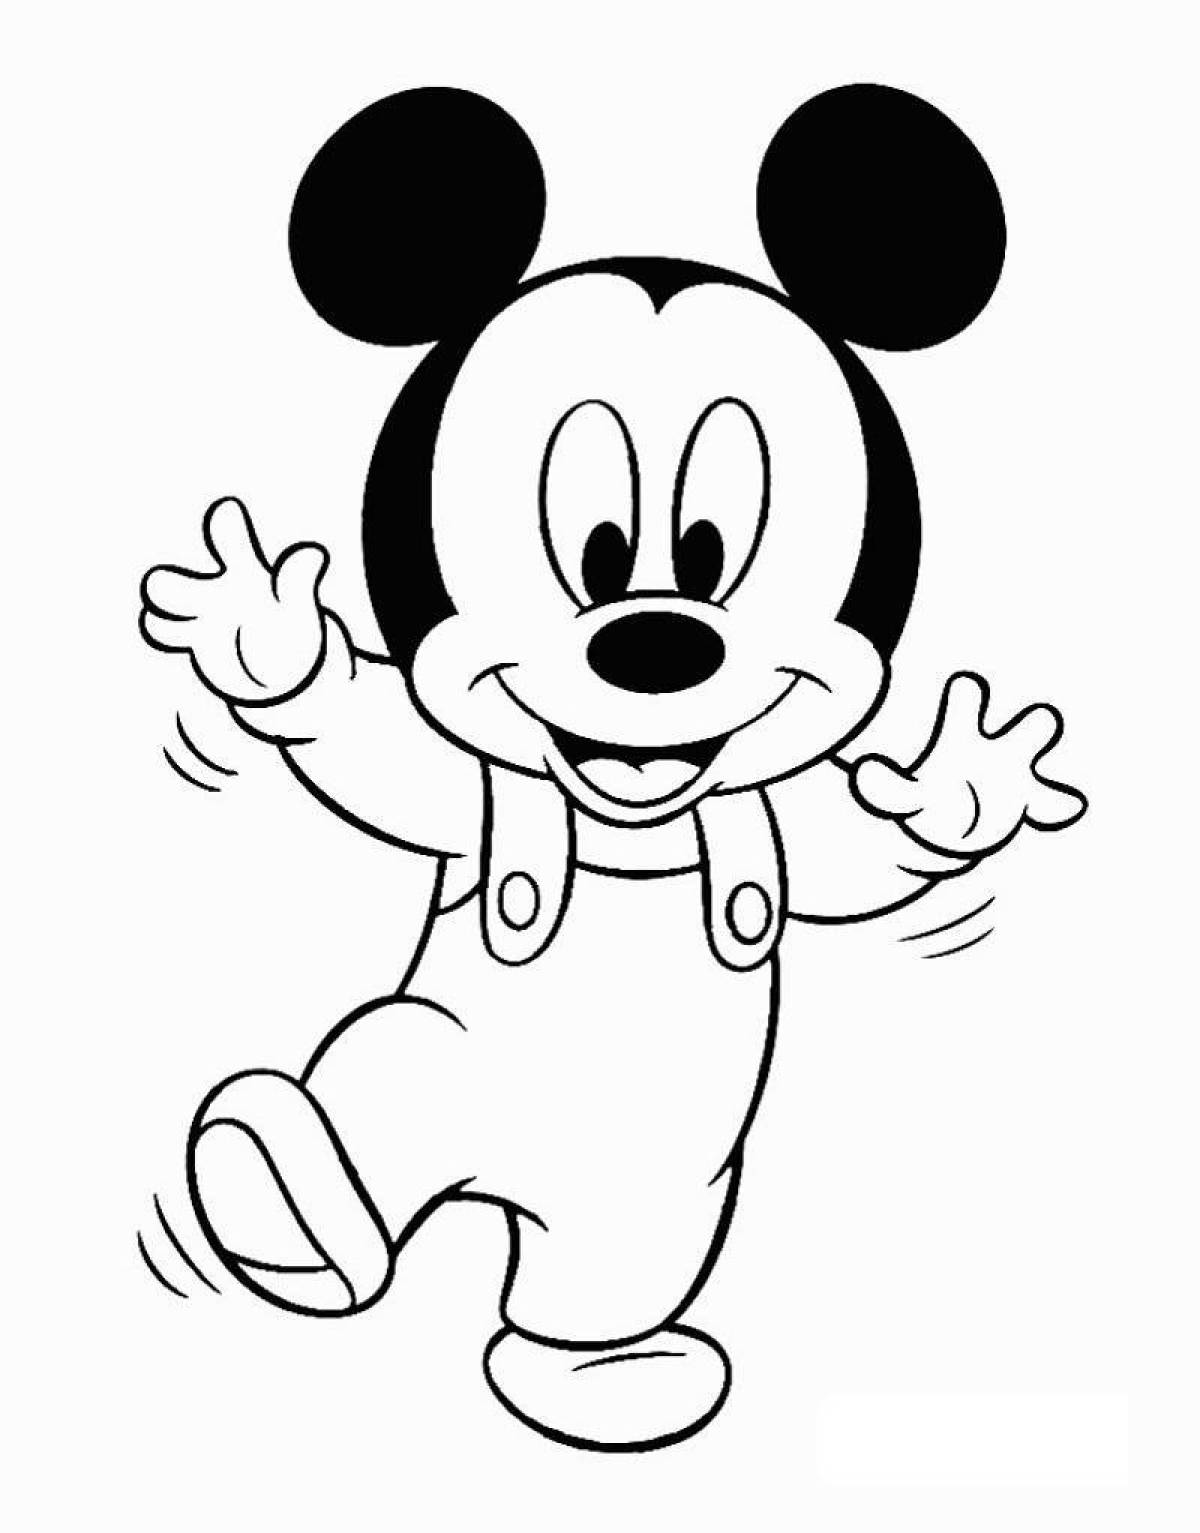 Cartoon easy coloring pages